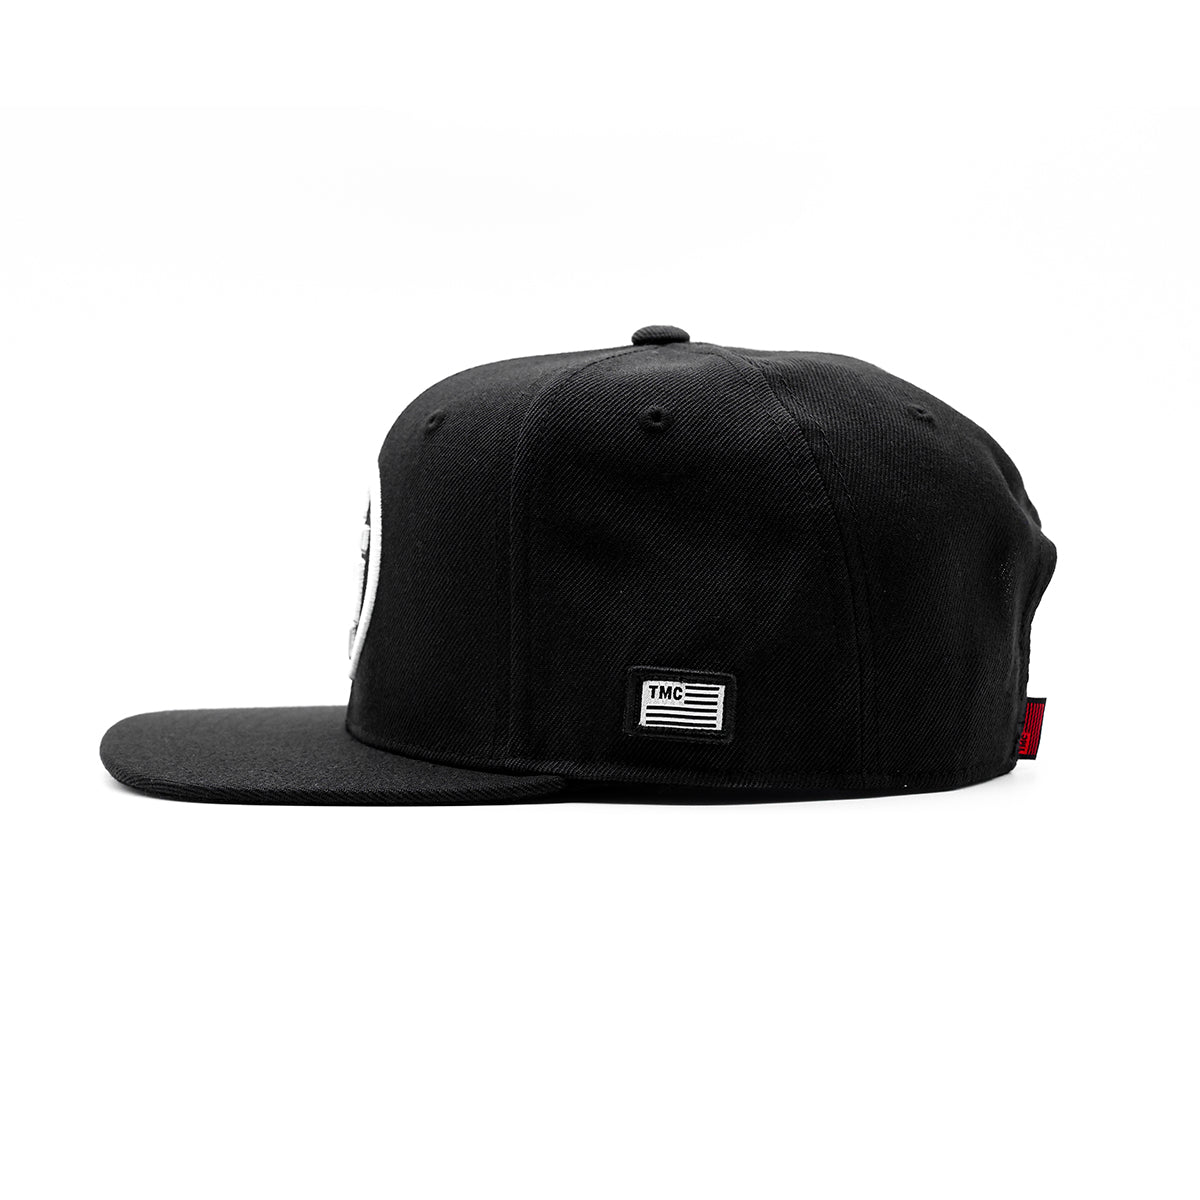 All Money In Limited Edition Snapback - Black/White - Side